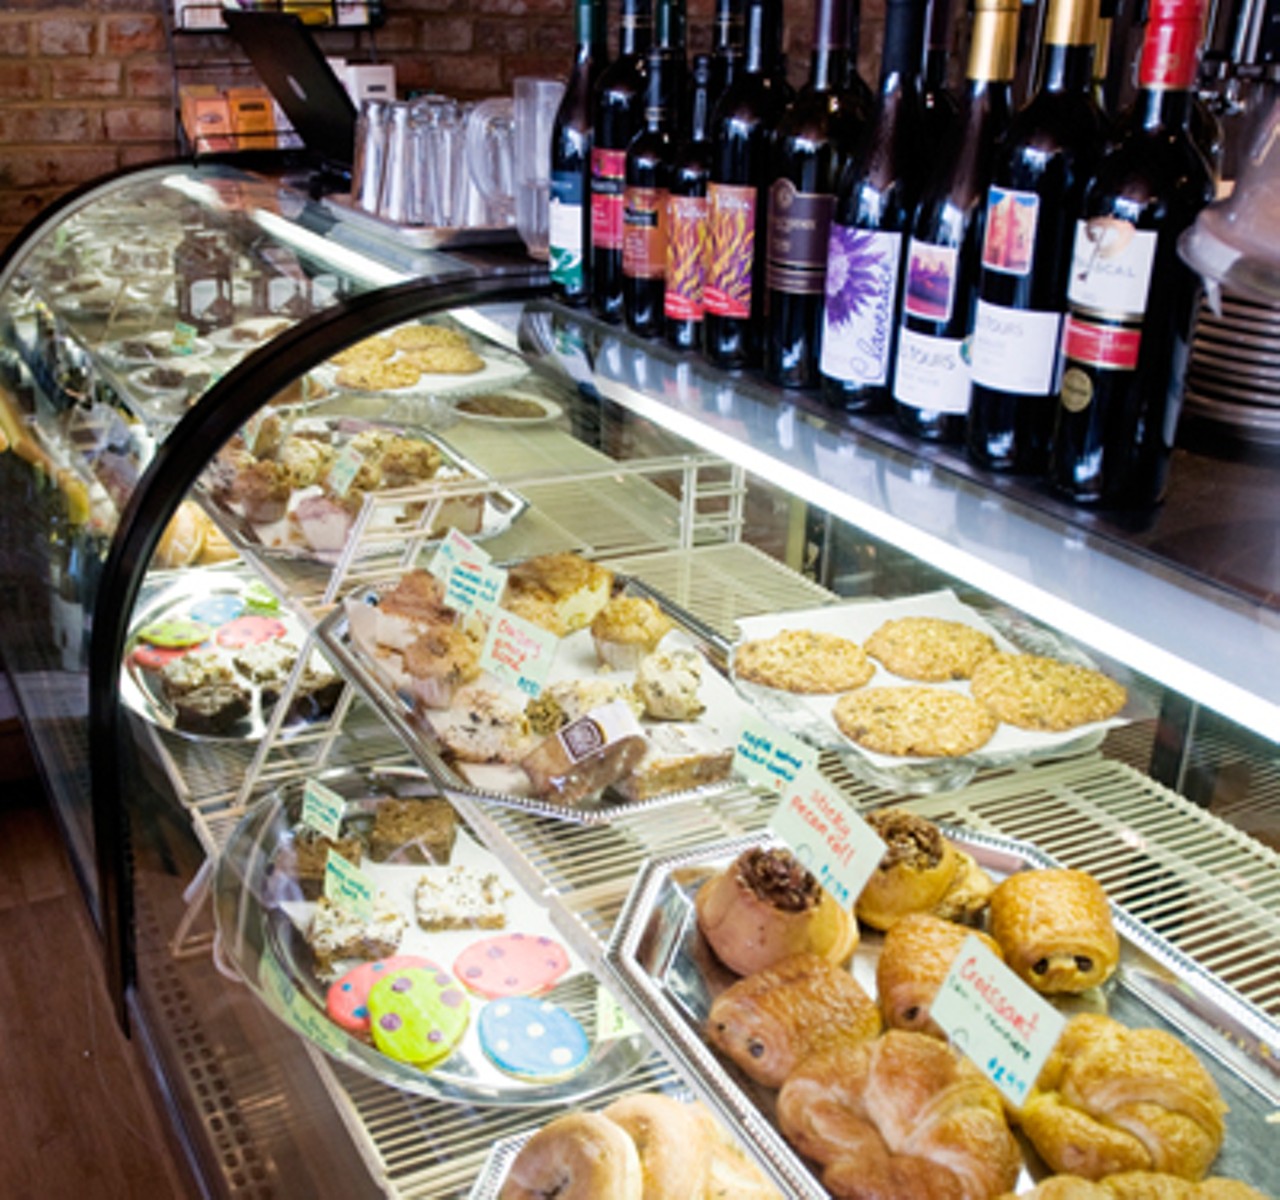 The counter display of pastries. Read Ian Froeb's review: "Plant Power: Local Harvest Caf&ecirc; embodies a welcome new concept in sustainable chowing-down."